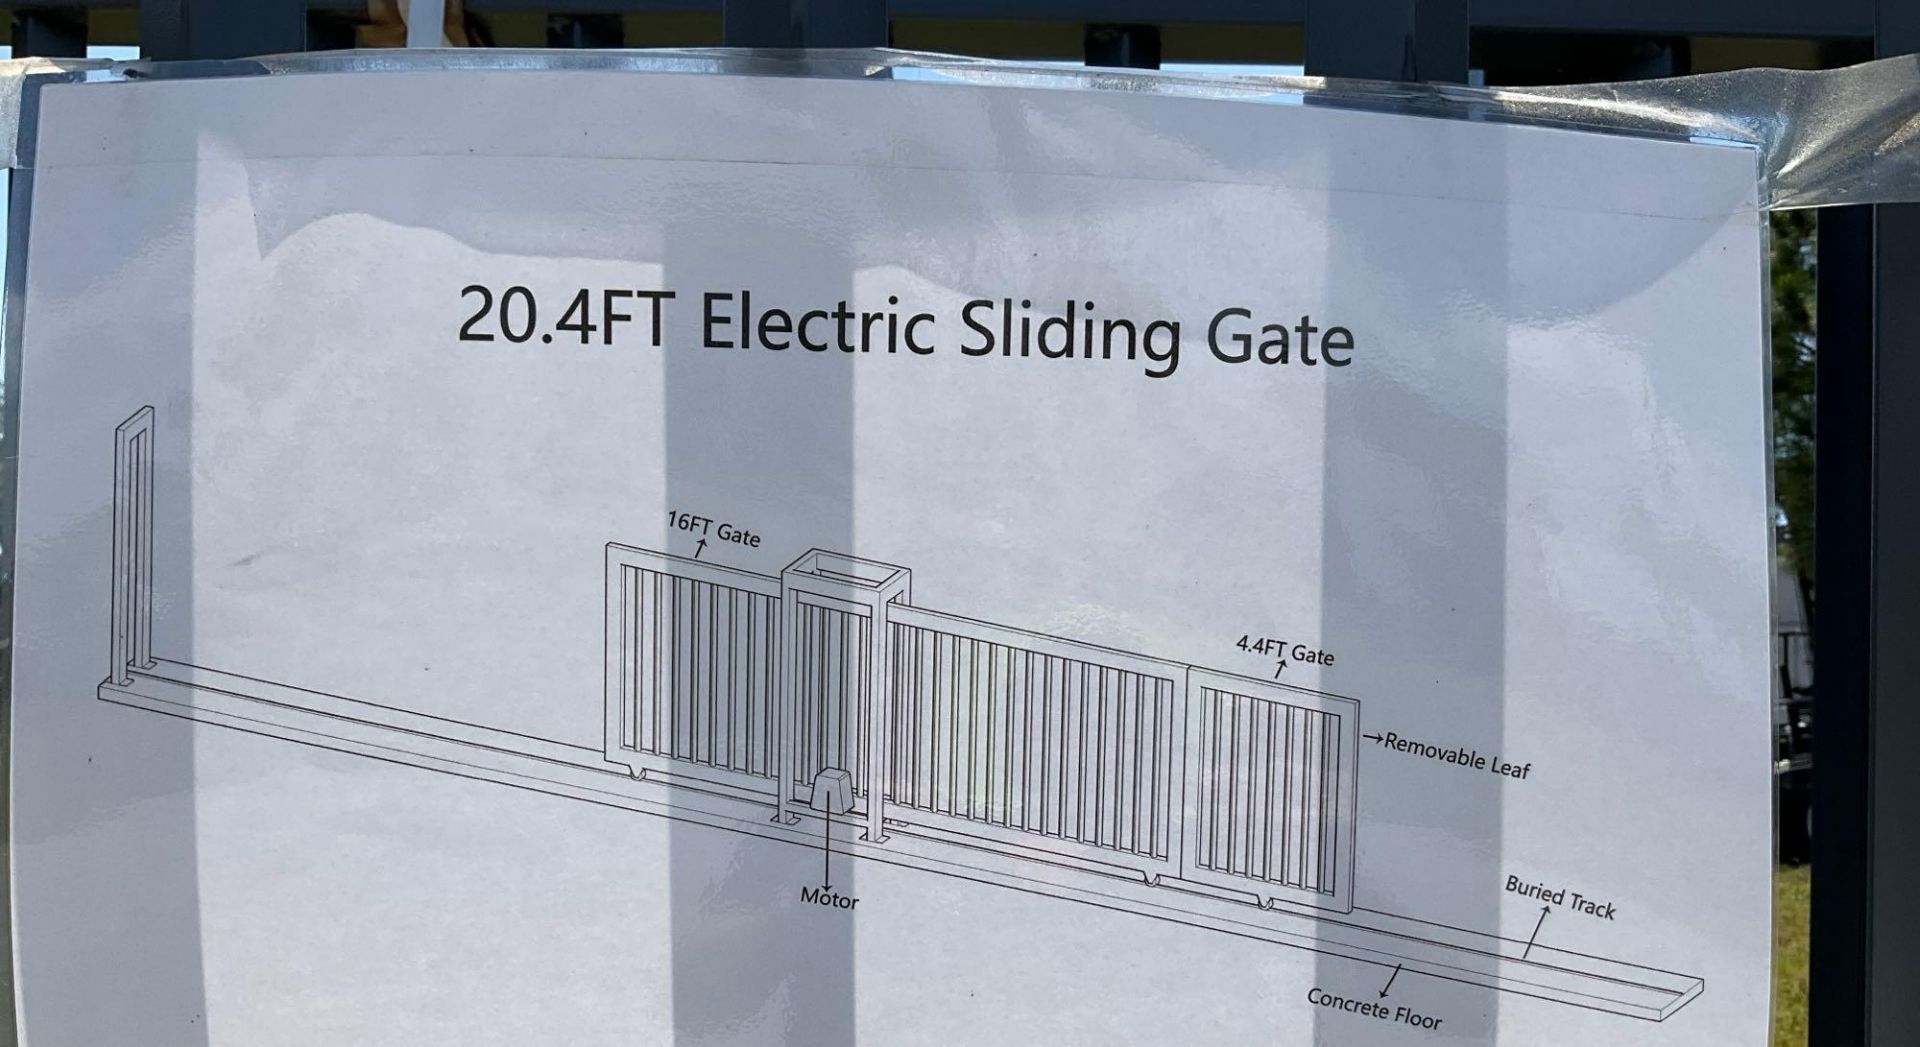 UNUSED 20.4FT ELECTRIC SLIDING GATE, 4.4FT REMOVABLE LEAF,...( PLEASE NOTE STOCK PHOTO USED ) - Image 5 of 9